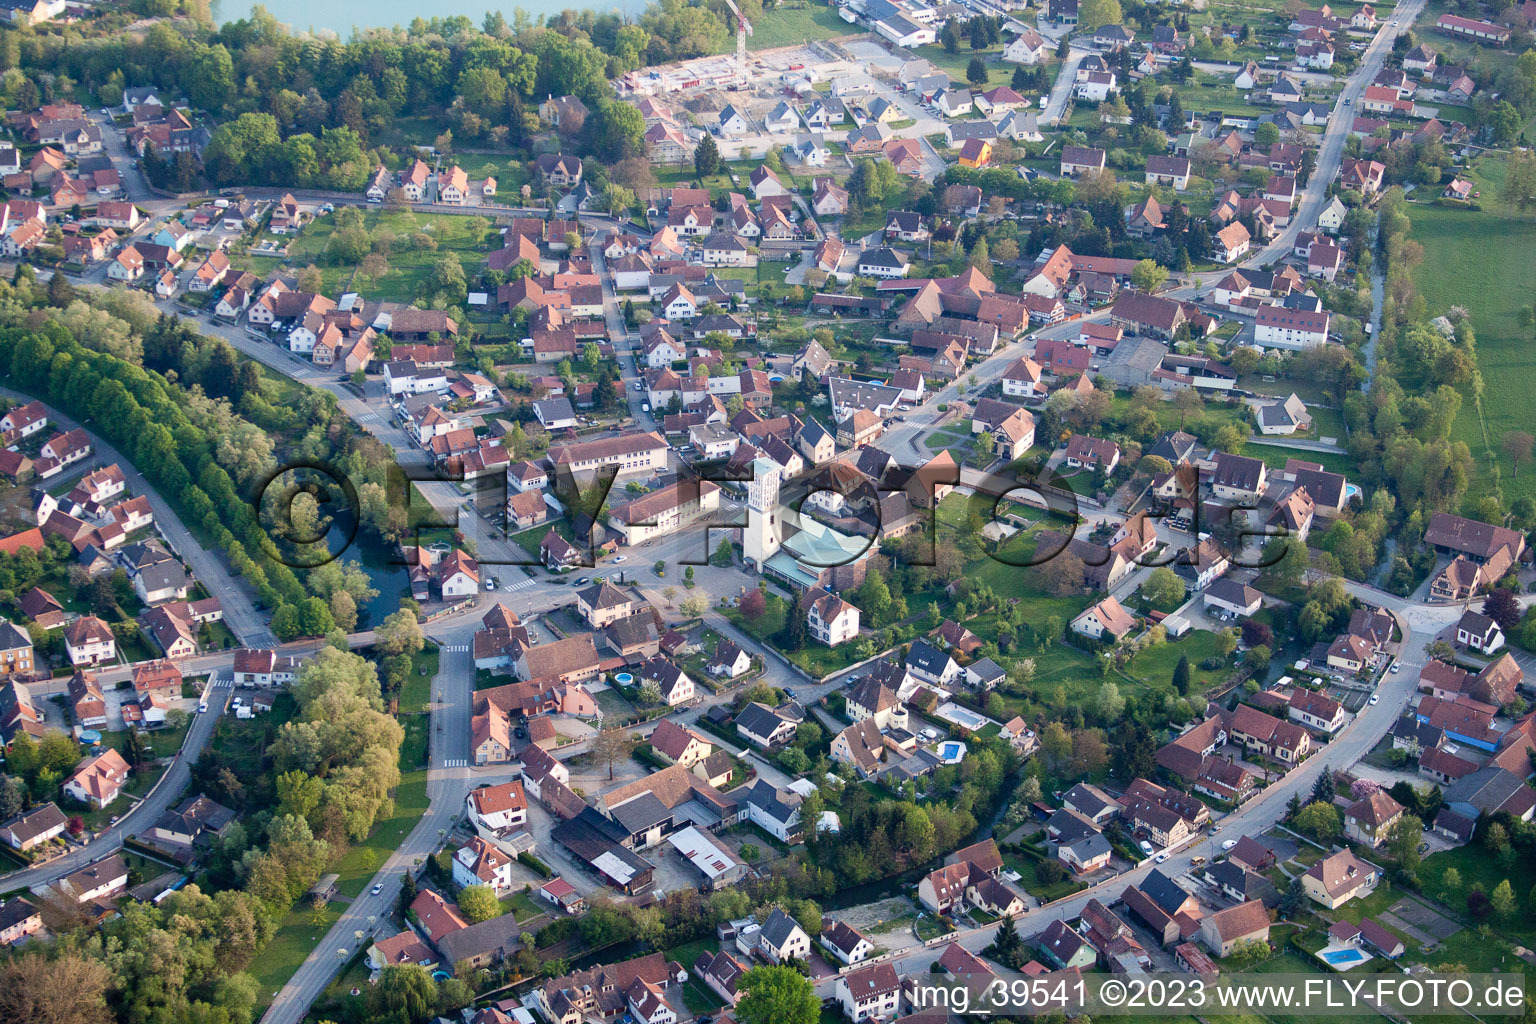 Offendorf in the state Bas-Rhin, France seen from above